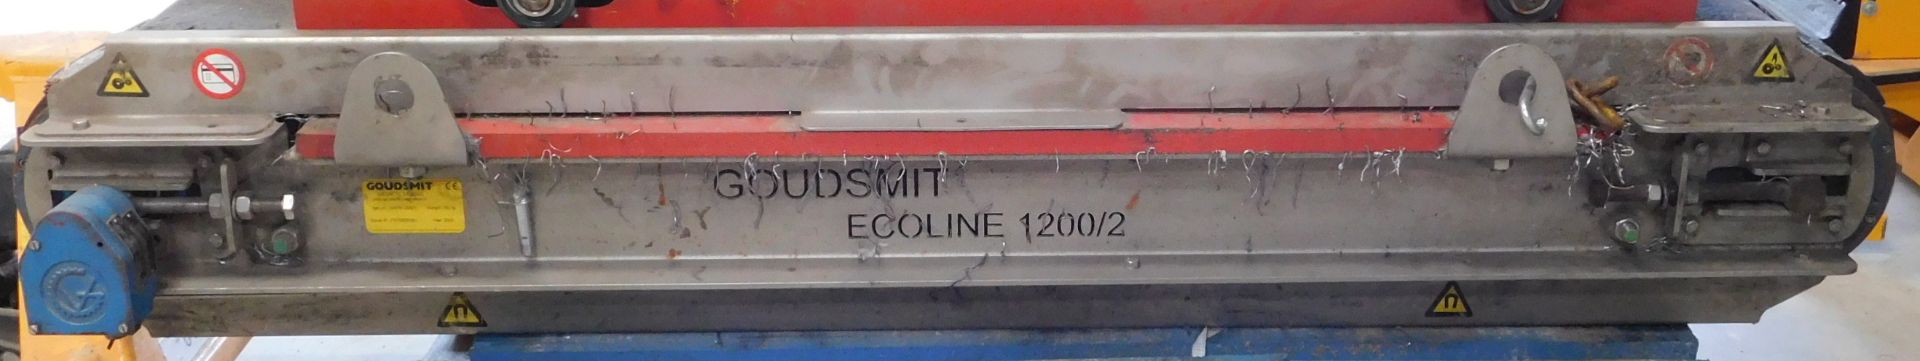 Goudsmit Ecoline 1200/2 Magnetic Over Belt (Location Brentwood. Please Refer to General Notes) - Image 2 of 2